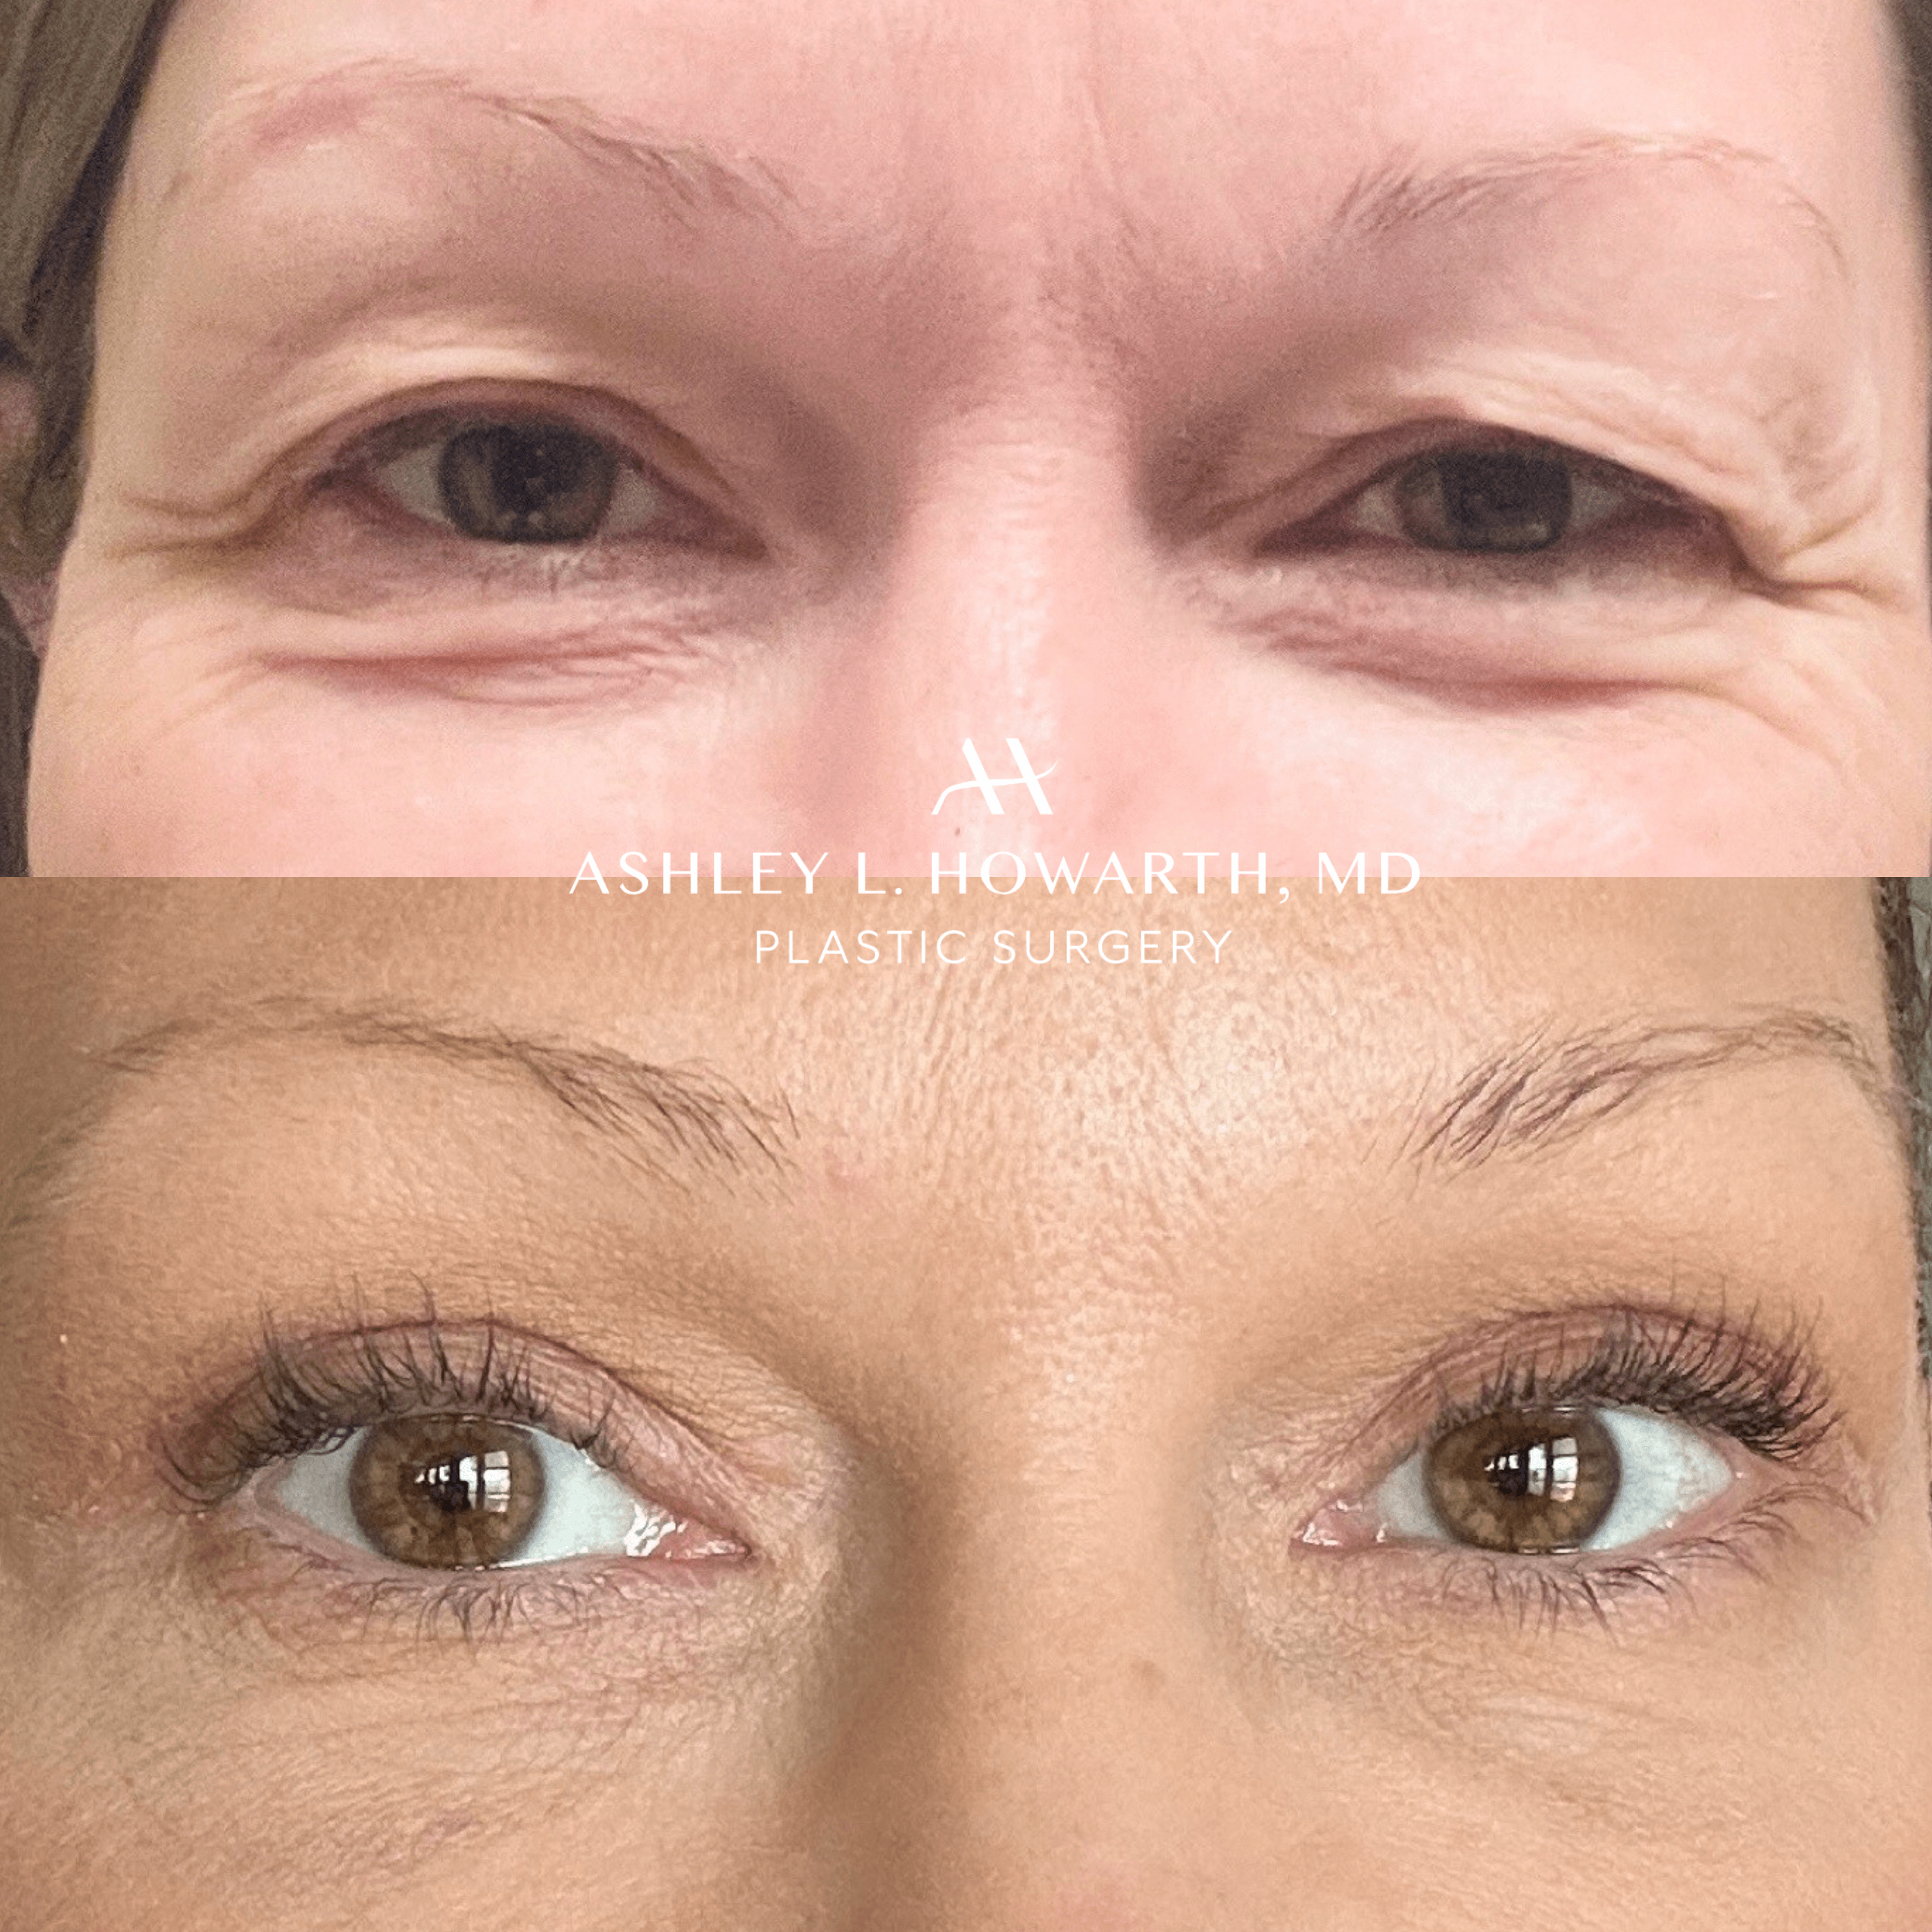 Upper lower blepharoplasty before after by Dr. Ashley Howarth. Upper lower eyelid surgery by board-certified plastic surgeon.